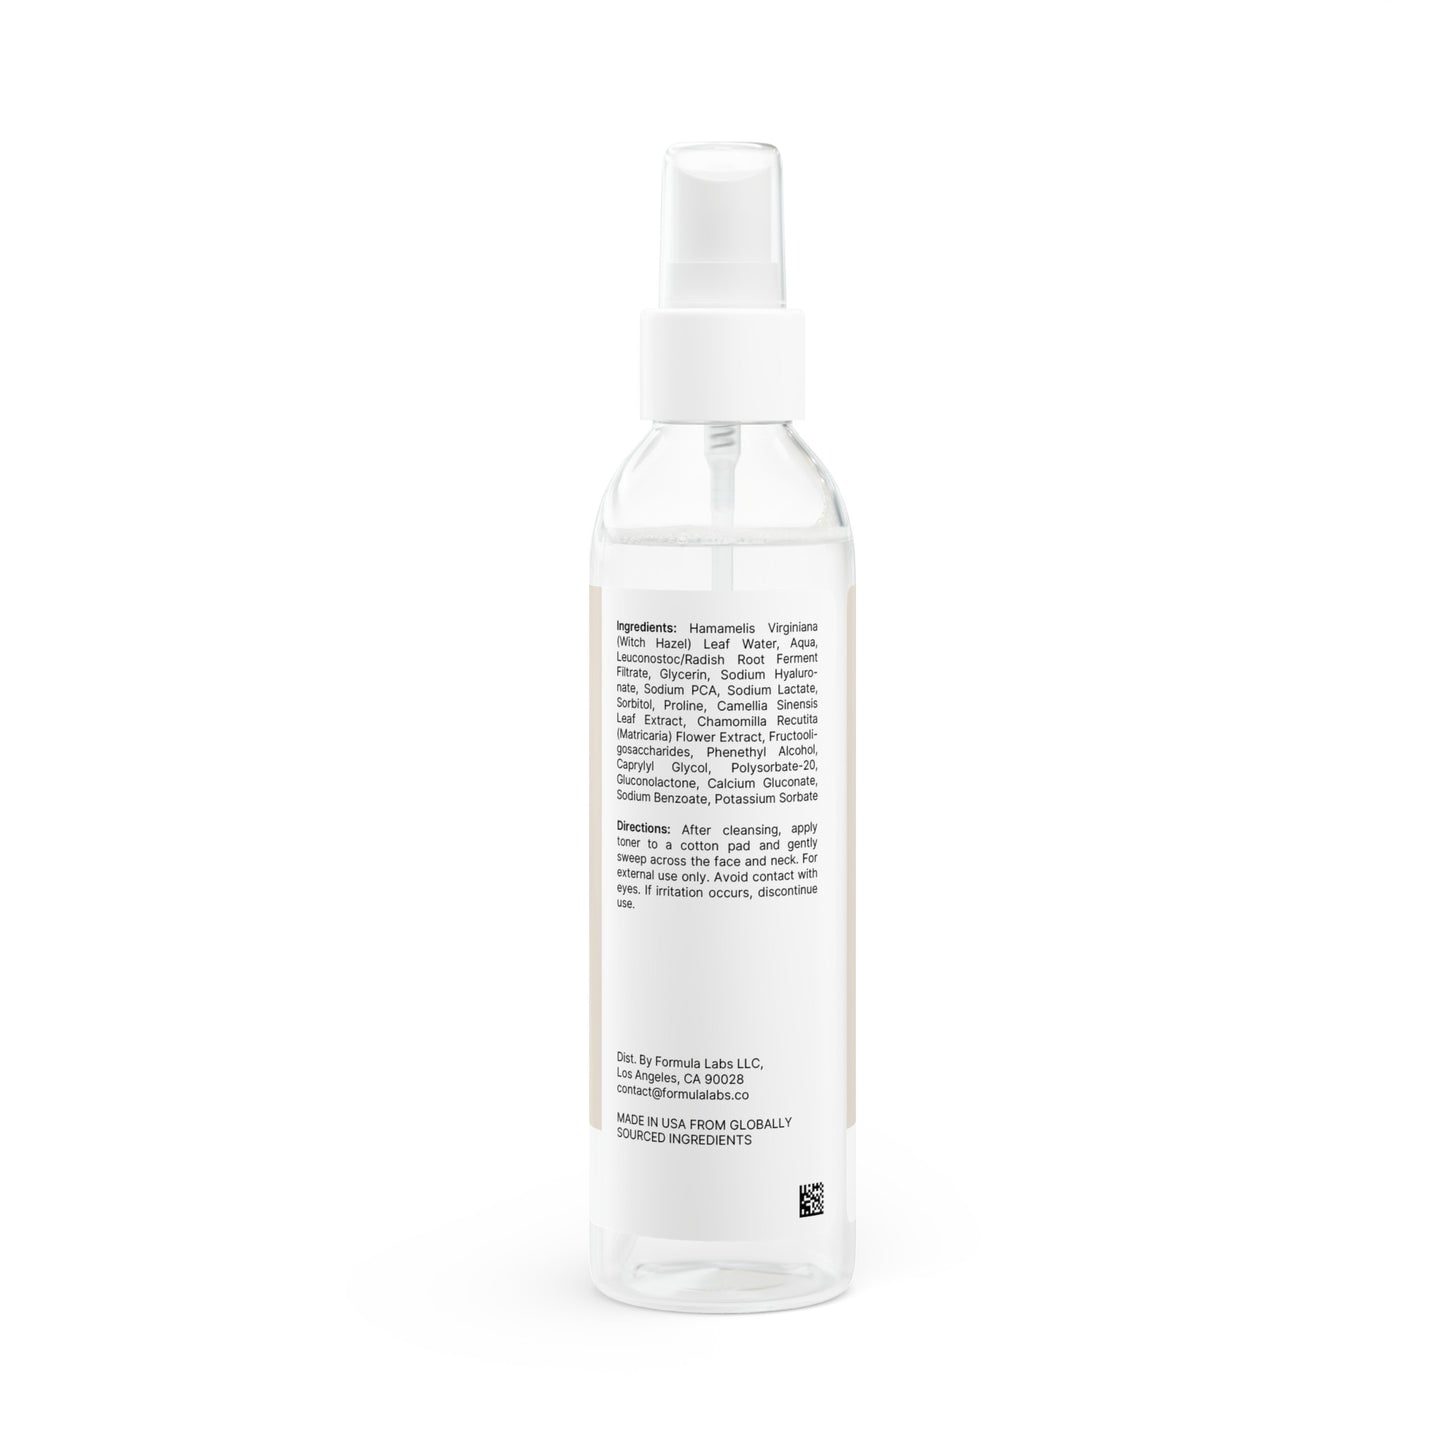 Only Nude Hydrating Toner, 6oz